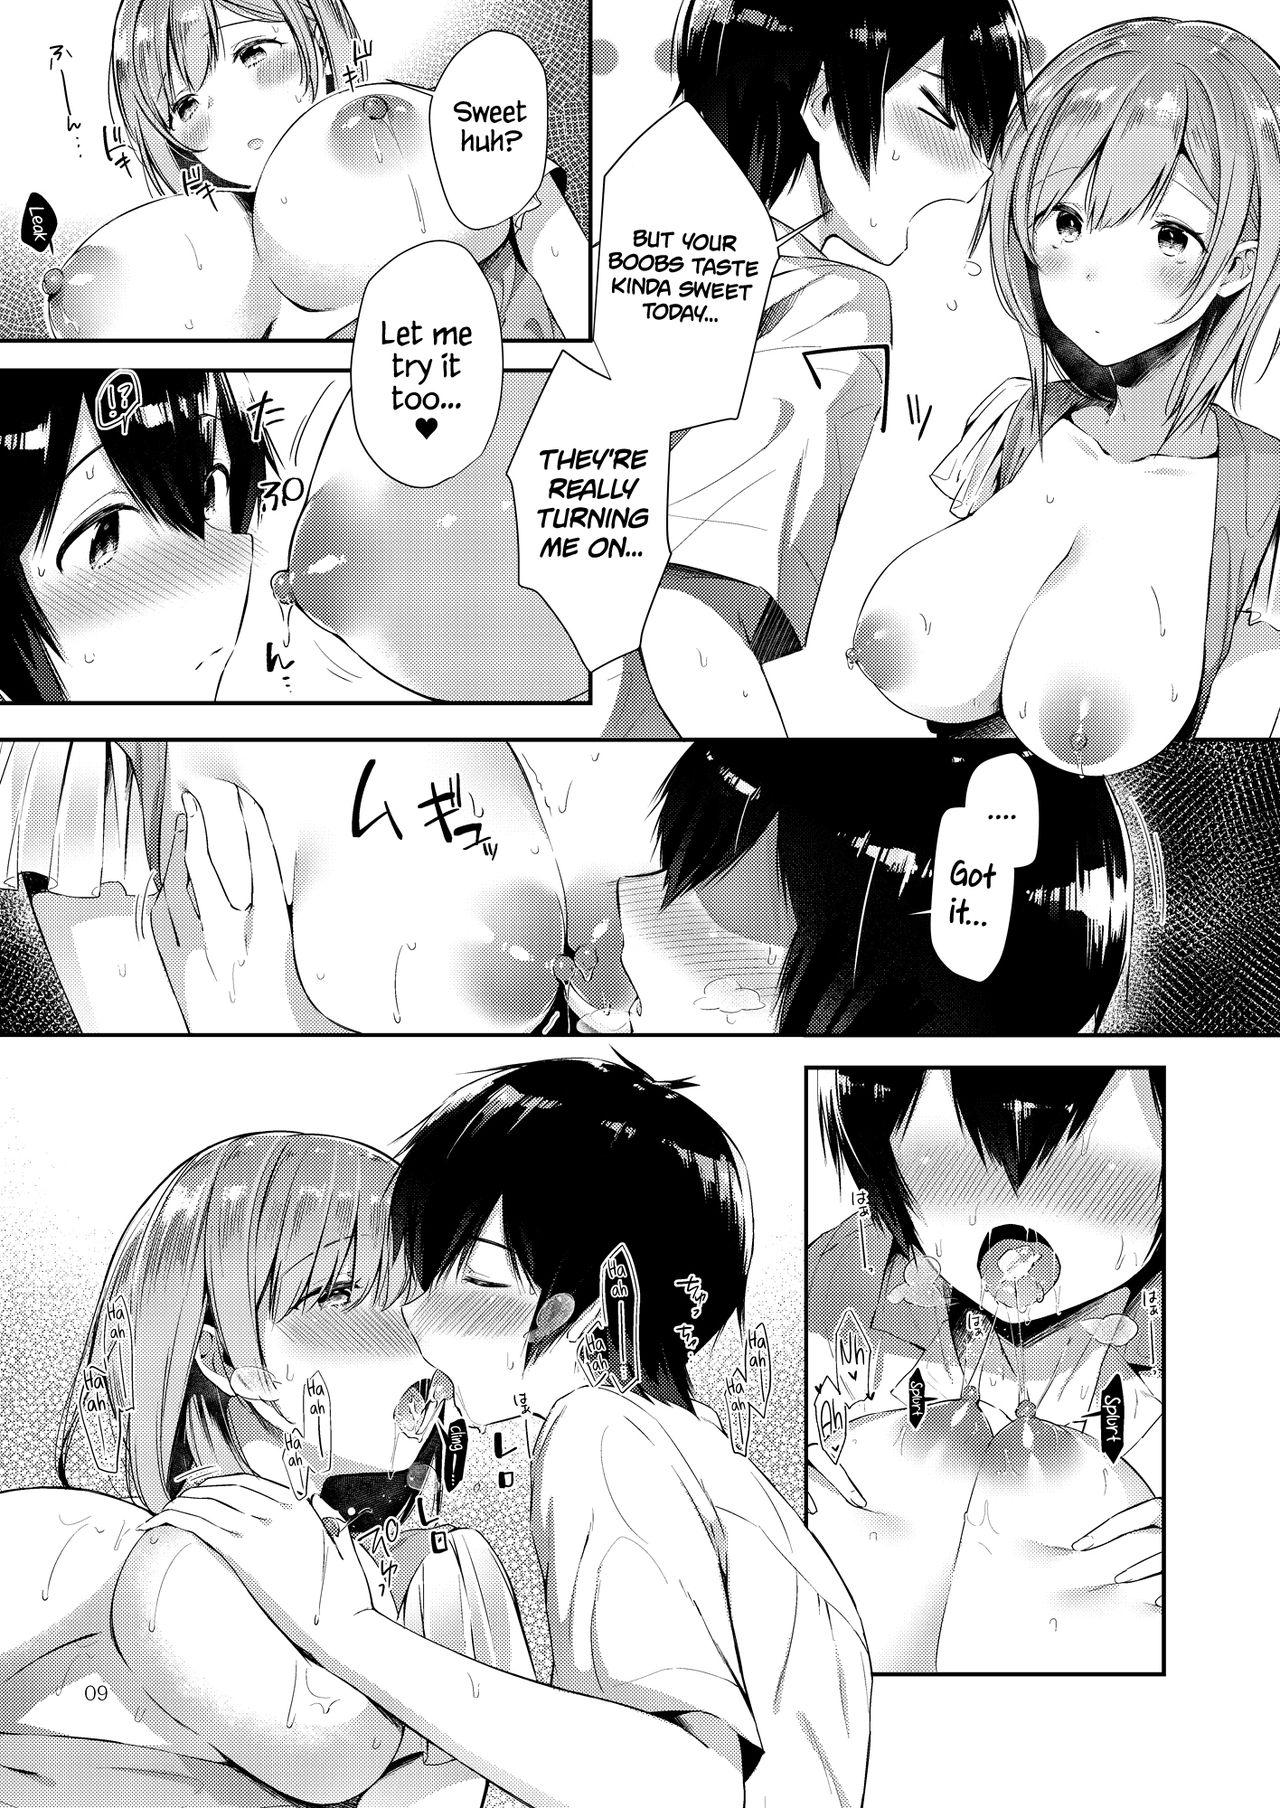 Erotica Amatoro Oppai | Sweet n’ Sticky Boobs ♥ 3some - Page 8